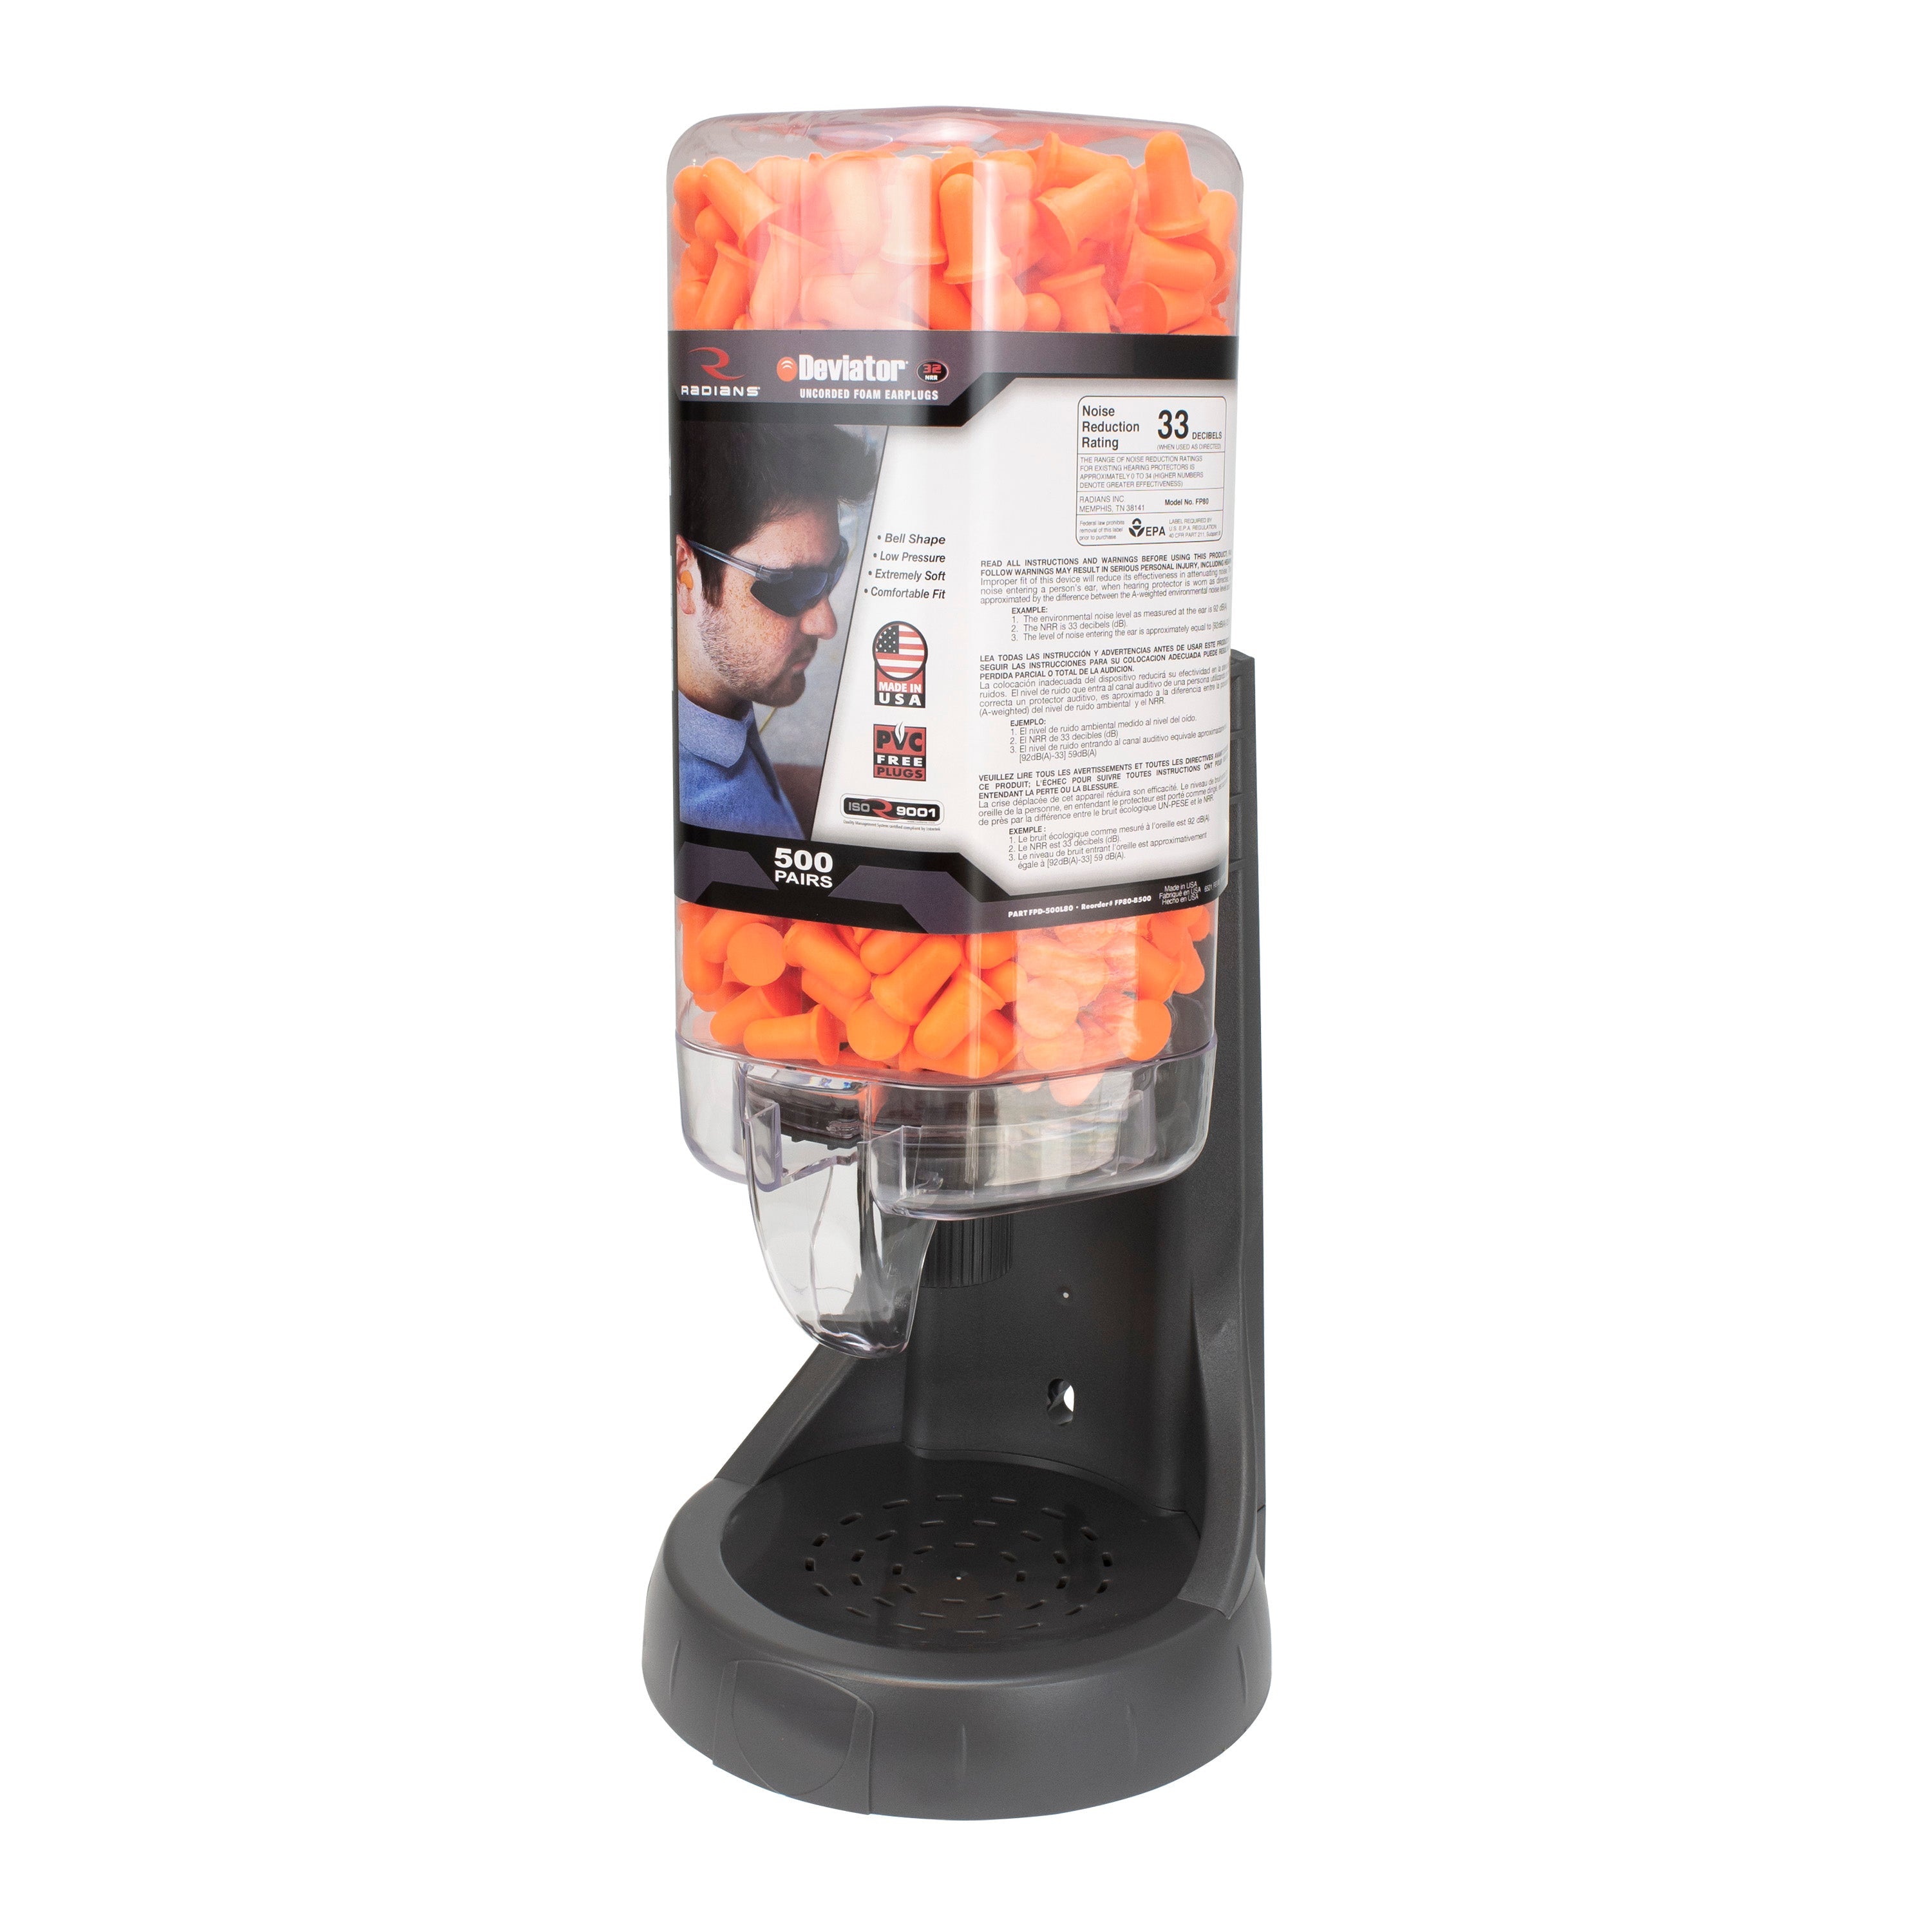 Radians Refillable Dispenser with Deviator™ FP80 Plugs - 500 Pair